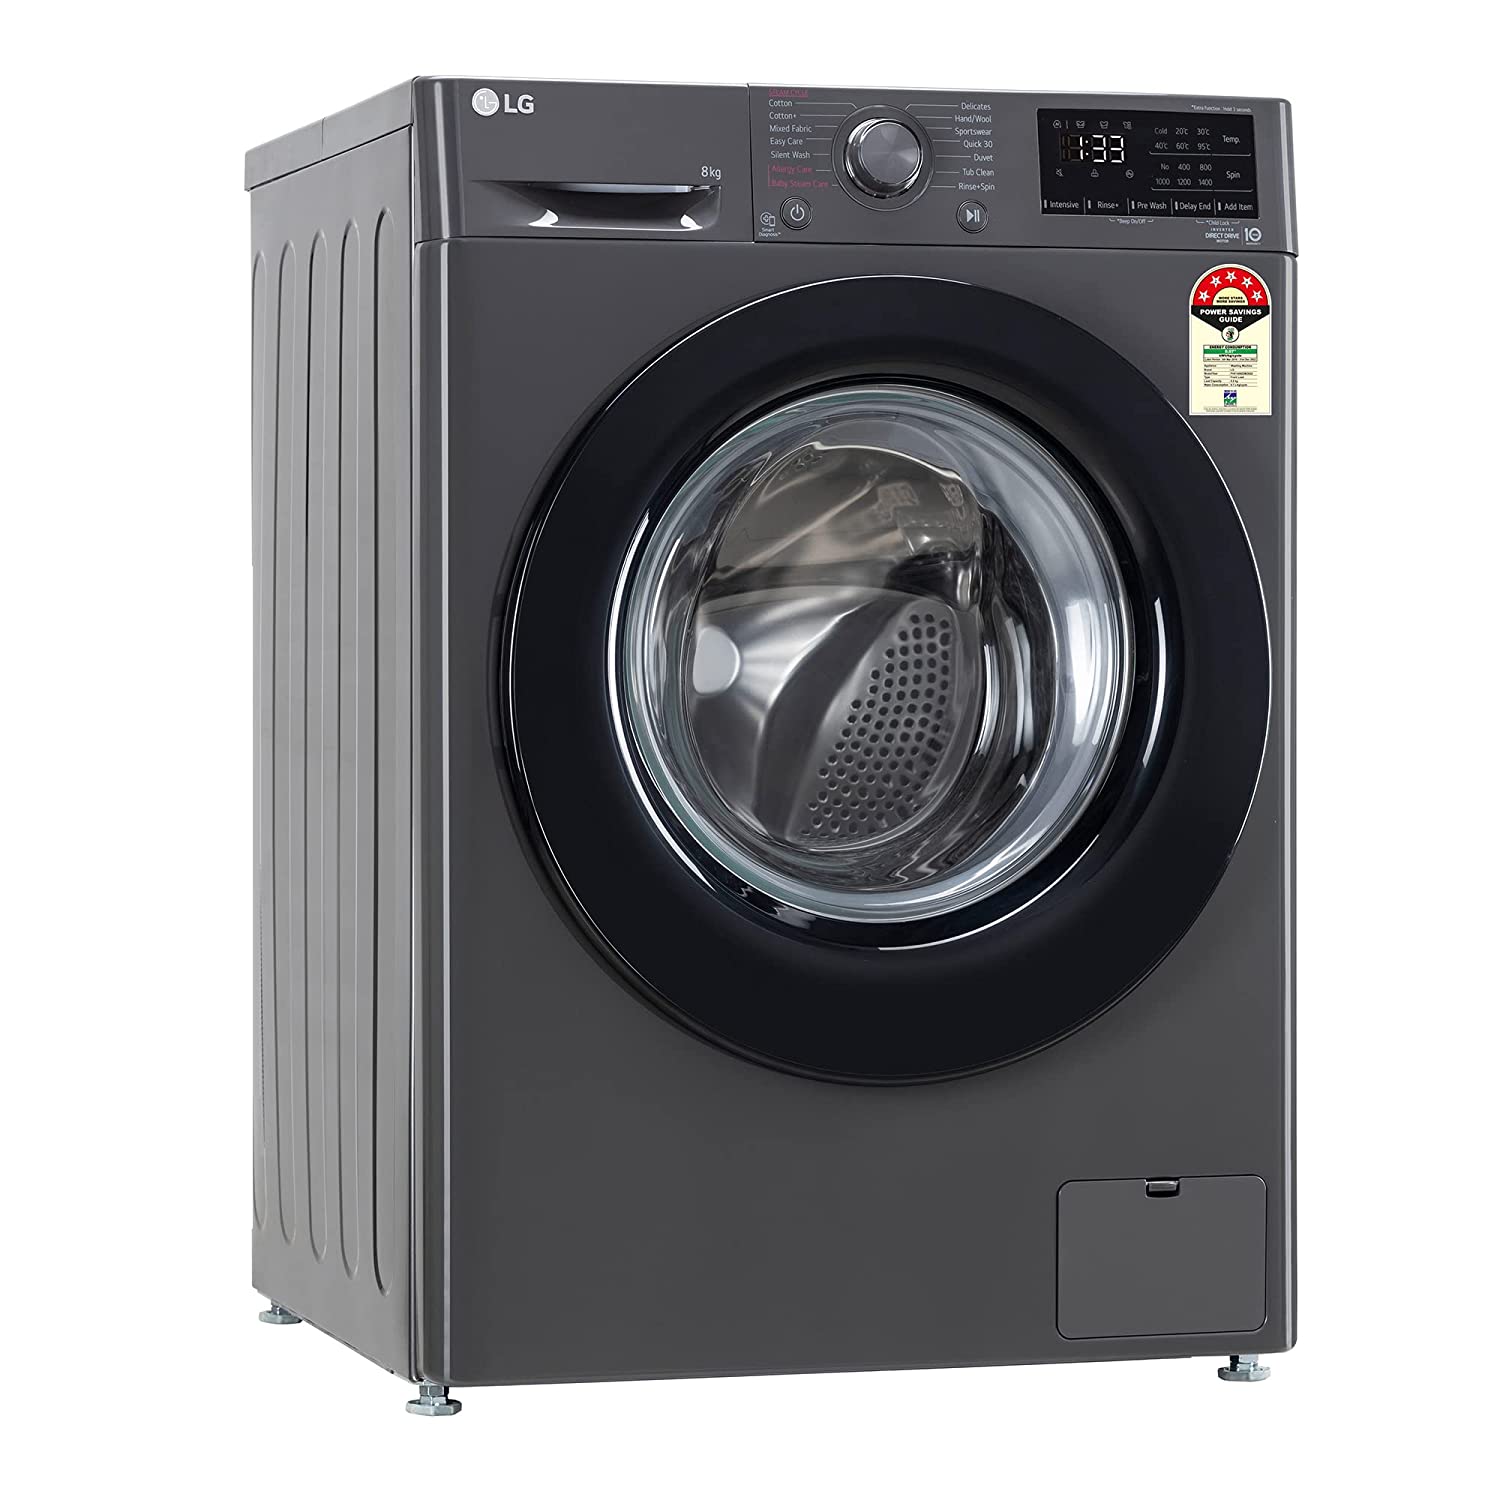 LG FHV1408Z2M 8 Kg 5 Star Inverter Fully-Automatic Front Loading Washing Machine with Inbuilt heater (Middle Black, AI DD Technology & Steam for Hygiene)